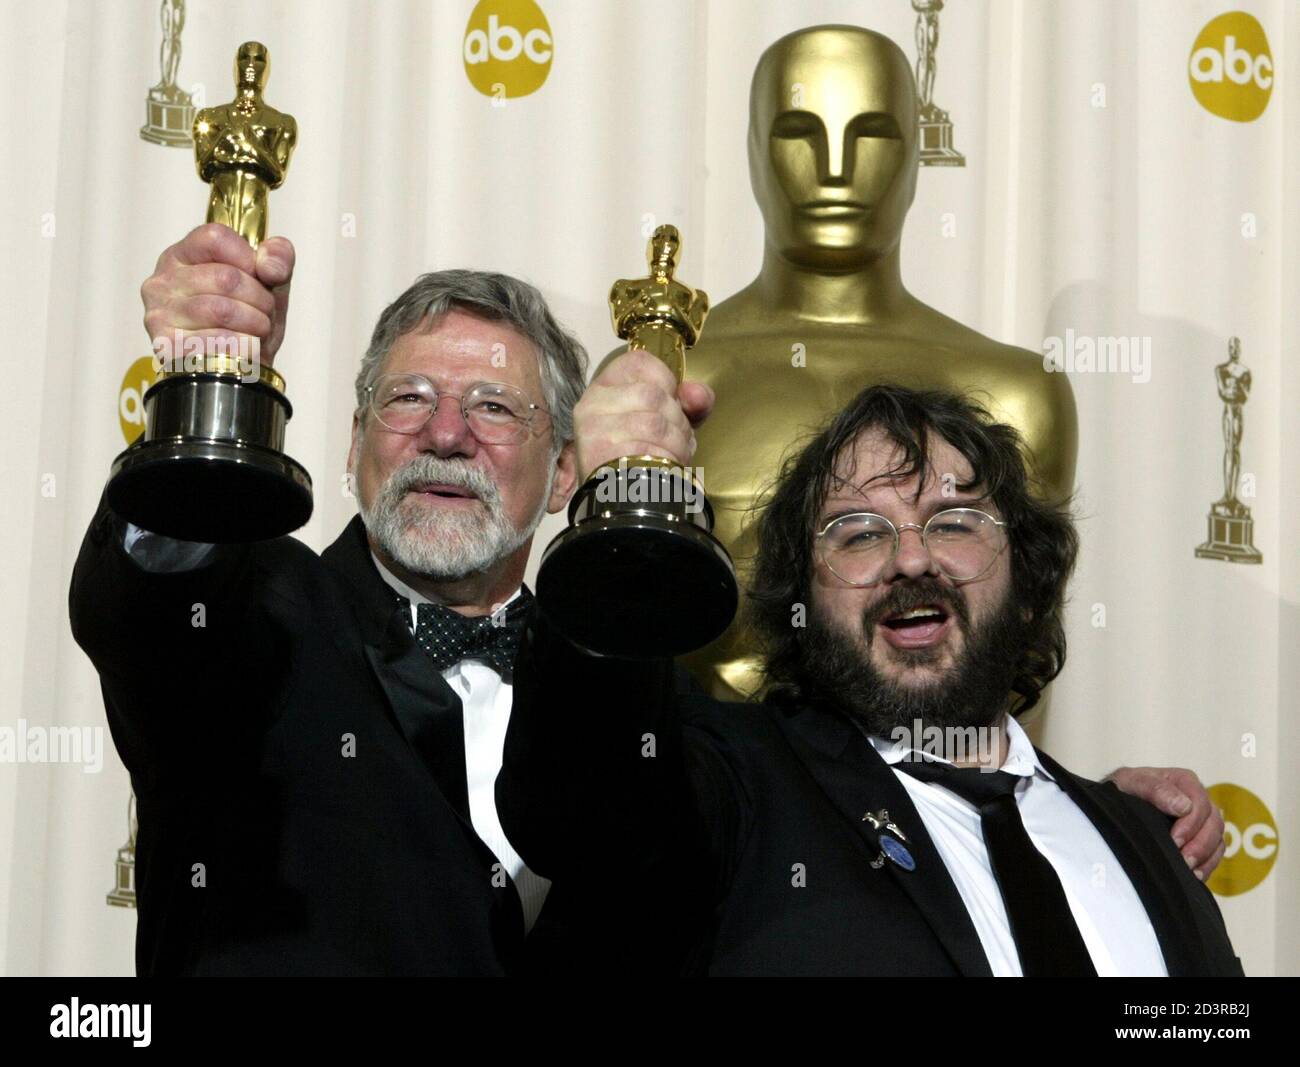 Producer/Director Peter Jackson (R) of New Zealand, and fellow producer  Barrie Osbourne with their Oscar statues after "The Lord of the Rings: The  Return of the King" won the Oscar for best